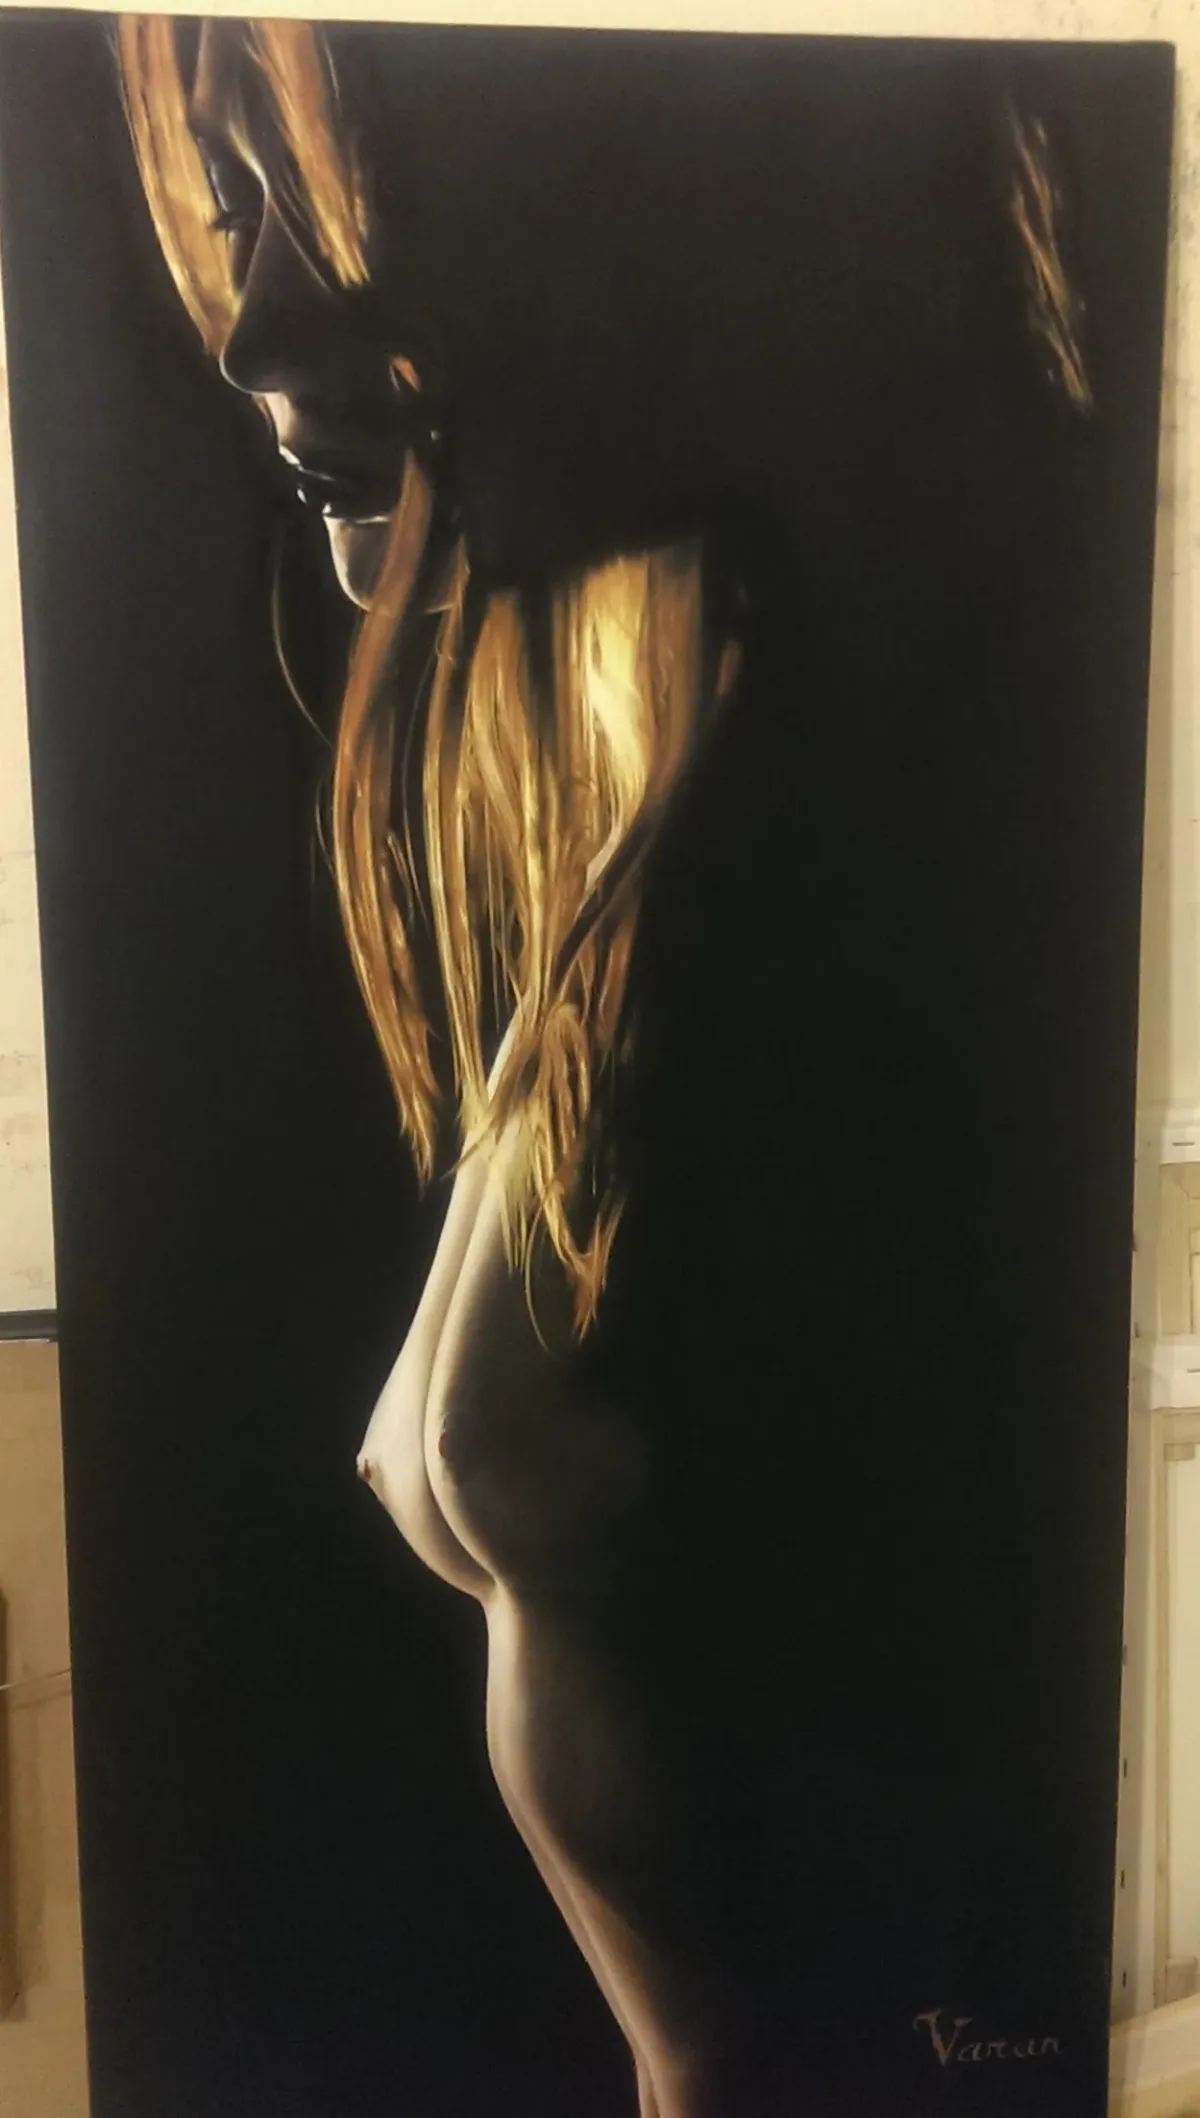 Painting of contemporary artist Vartan Ghazarian - Nude. For sale.